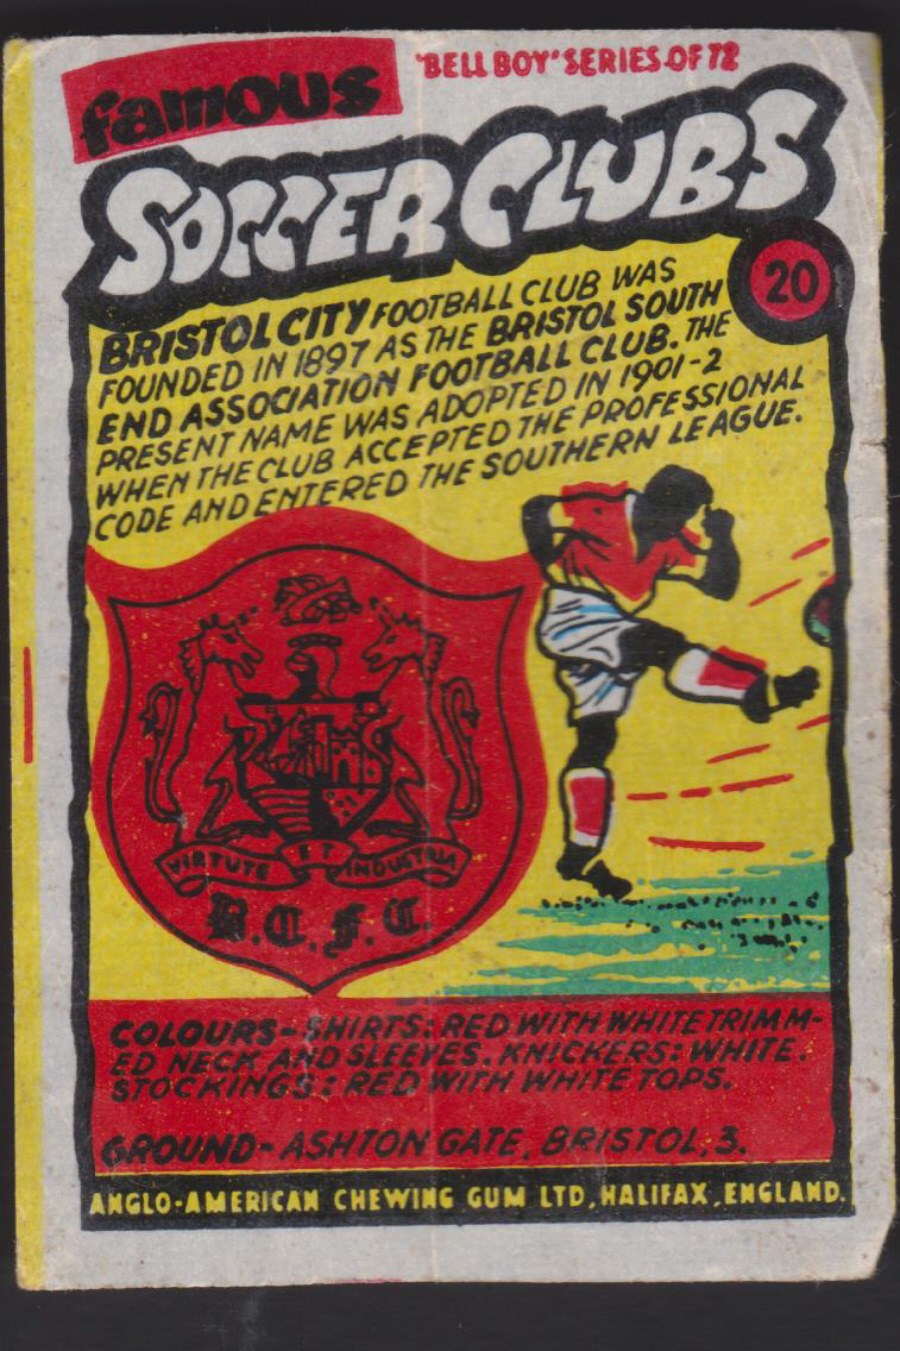 Anglo-American-Chewing-Gum-Wax-Wrapper-Famous-Soccer-Clubs-No-20 - Bristol City